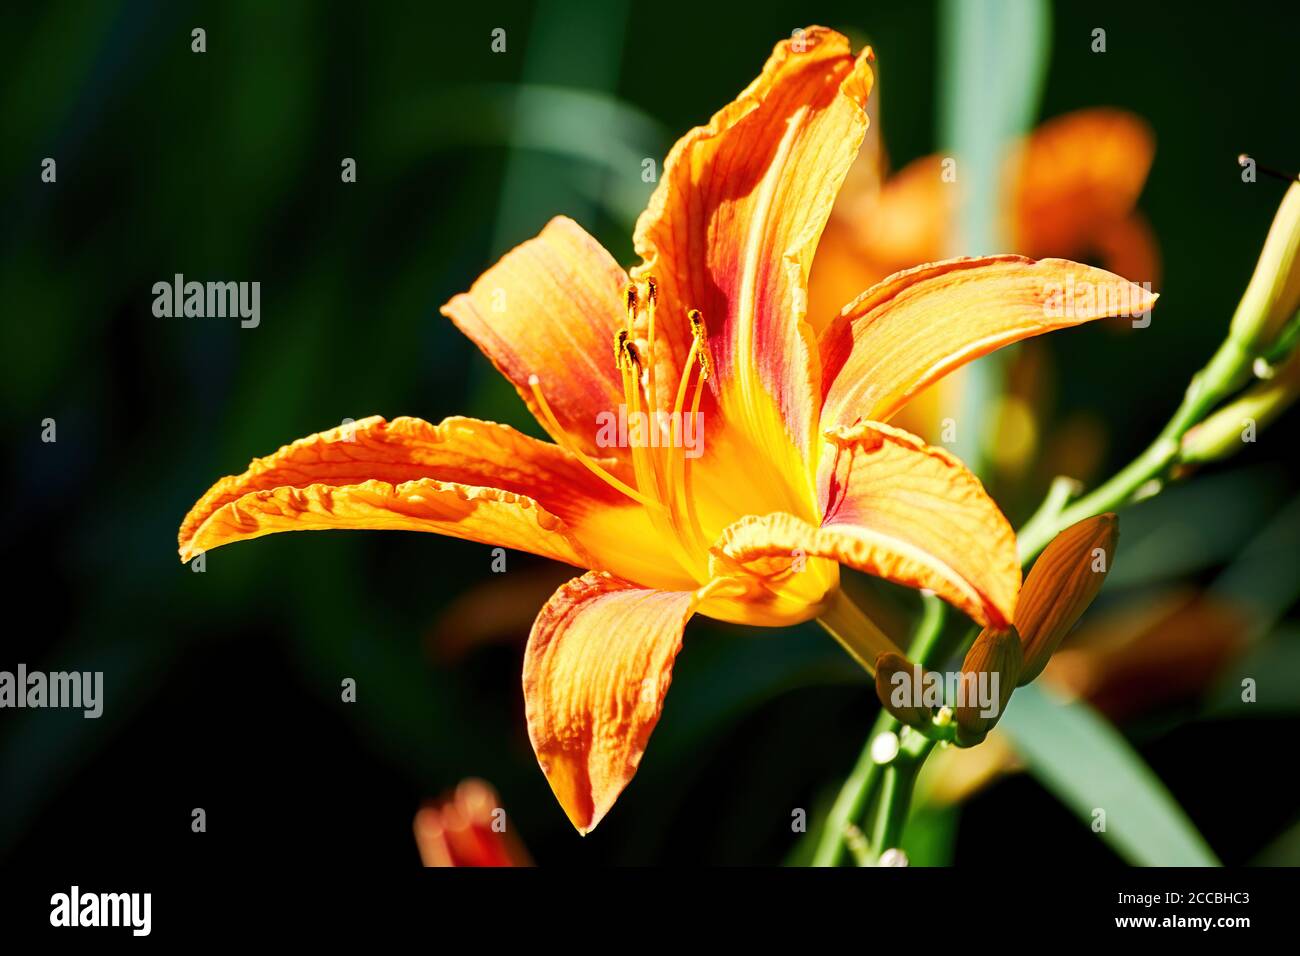 Small elegant orange lily on the flower bed in the garden. Herbal and floral backdrops Stock Photo